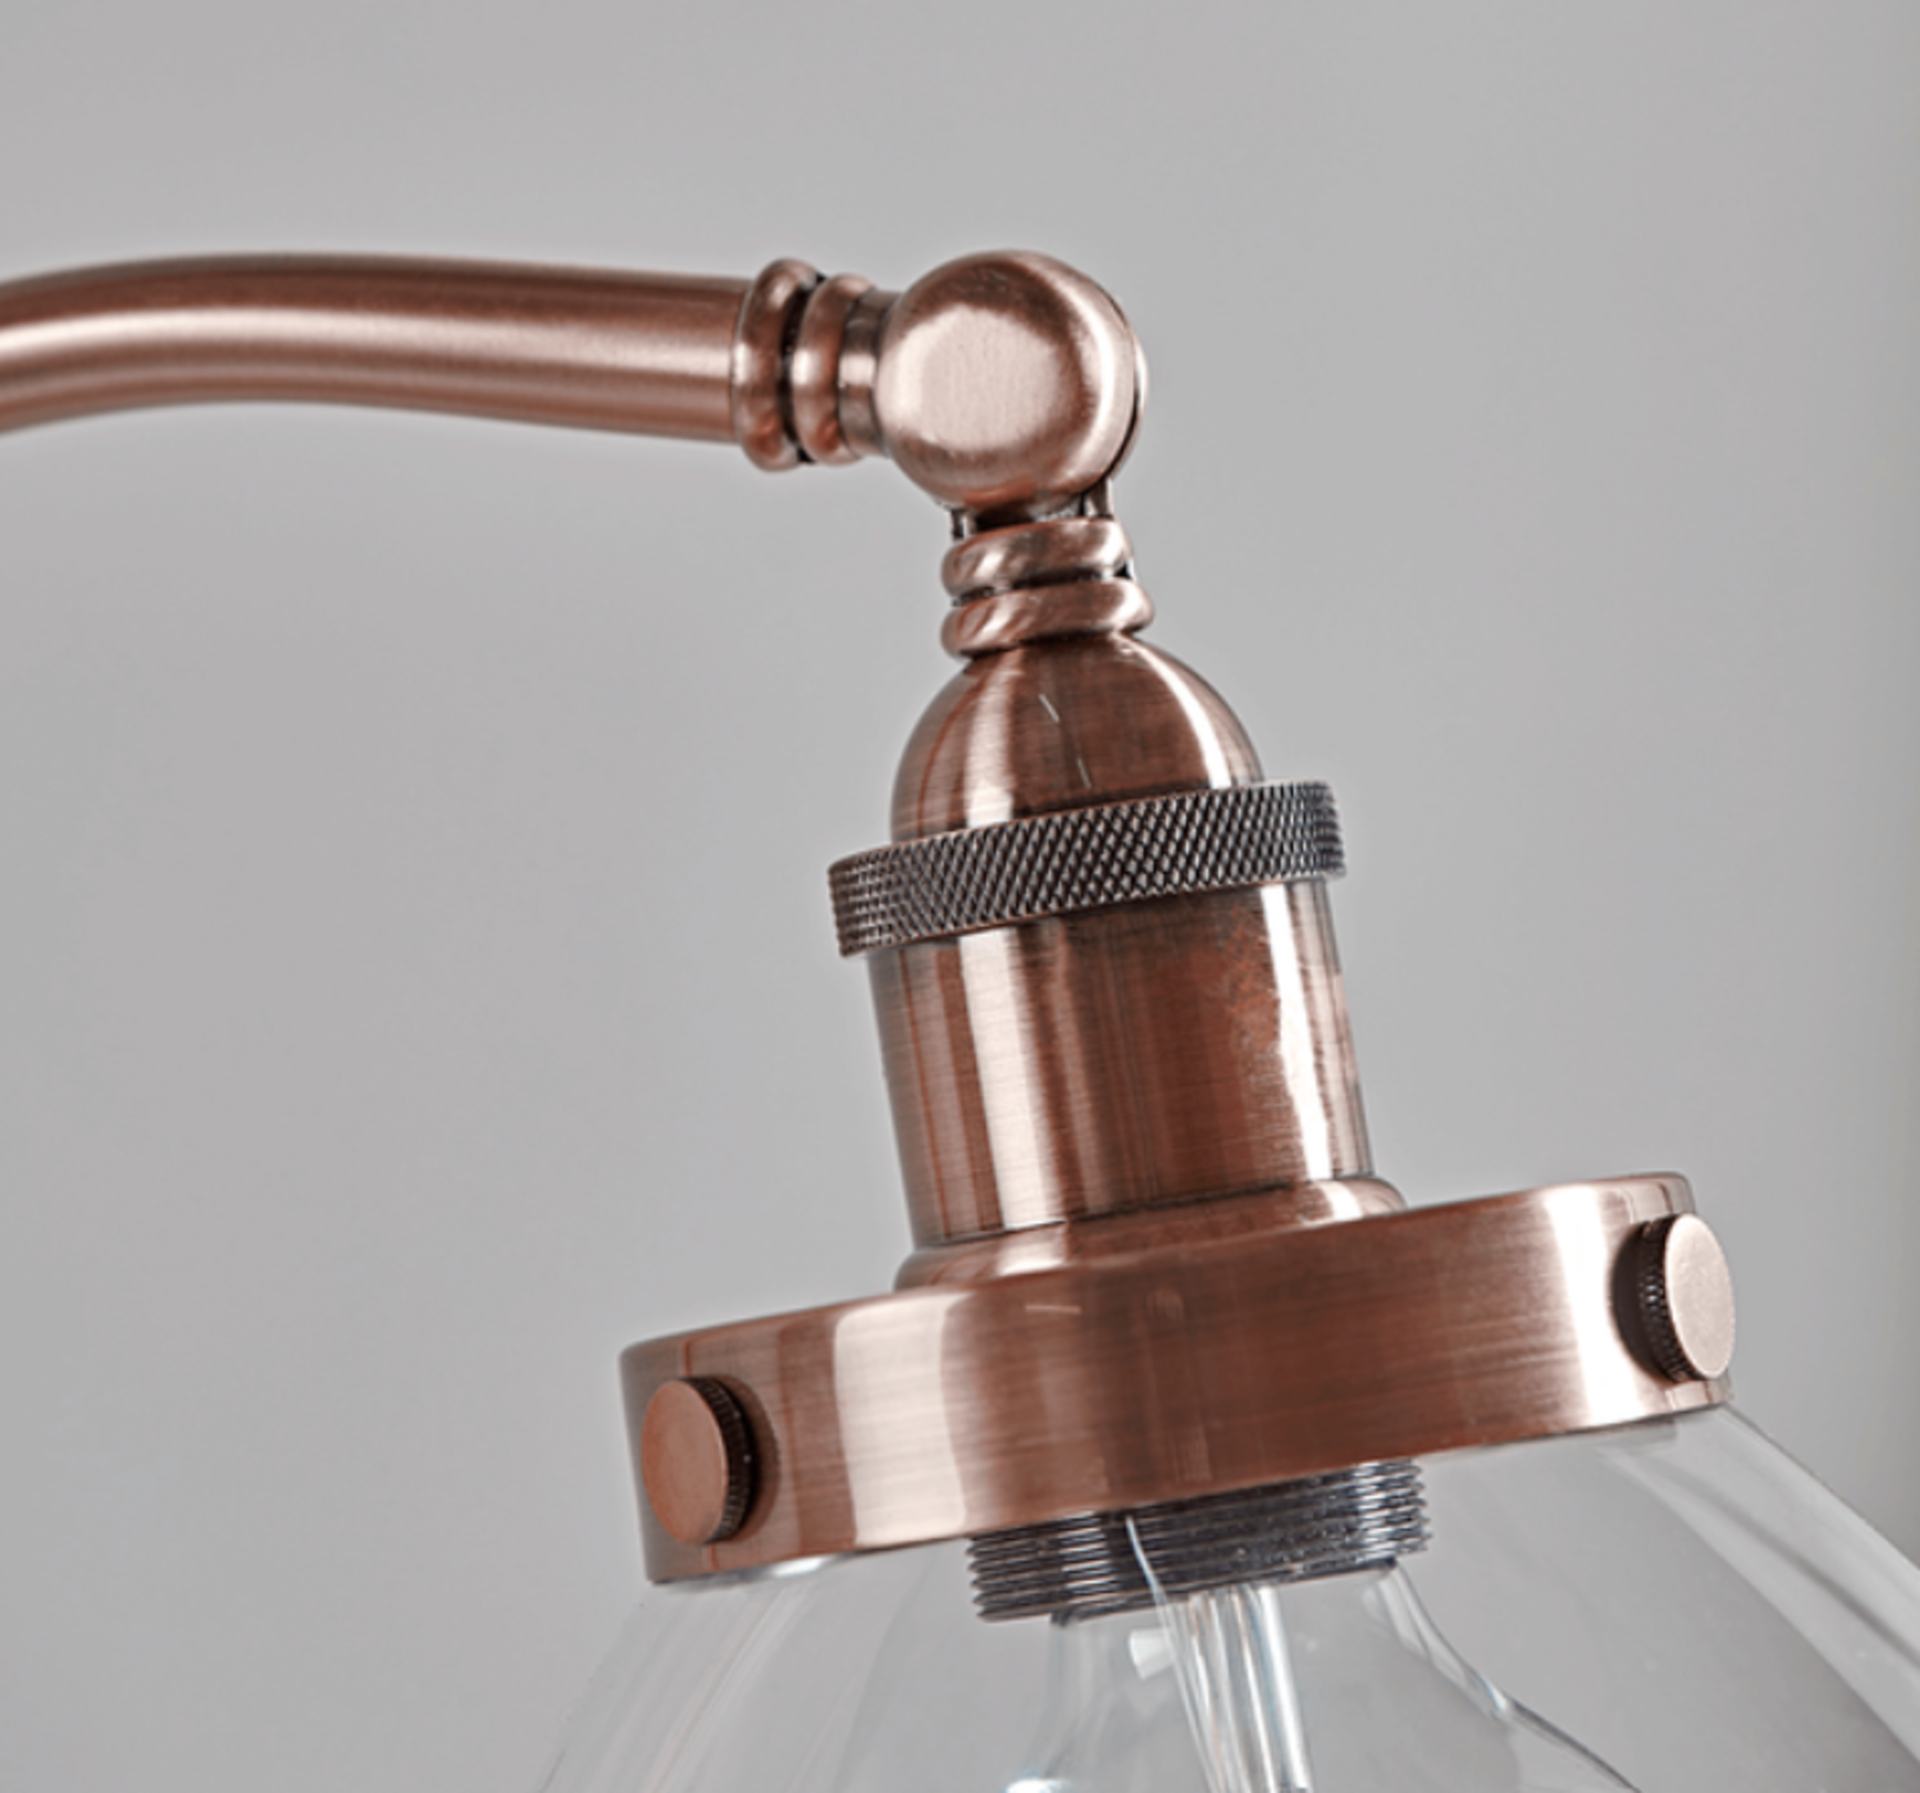 Domed Glass Floor Lamp - Copper. RRP £245.00. Complete with authentic industrial features, our - Image 2 of 2